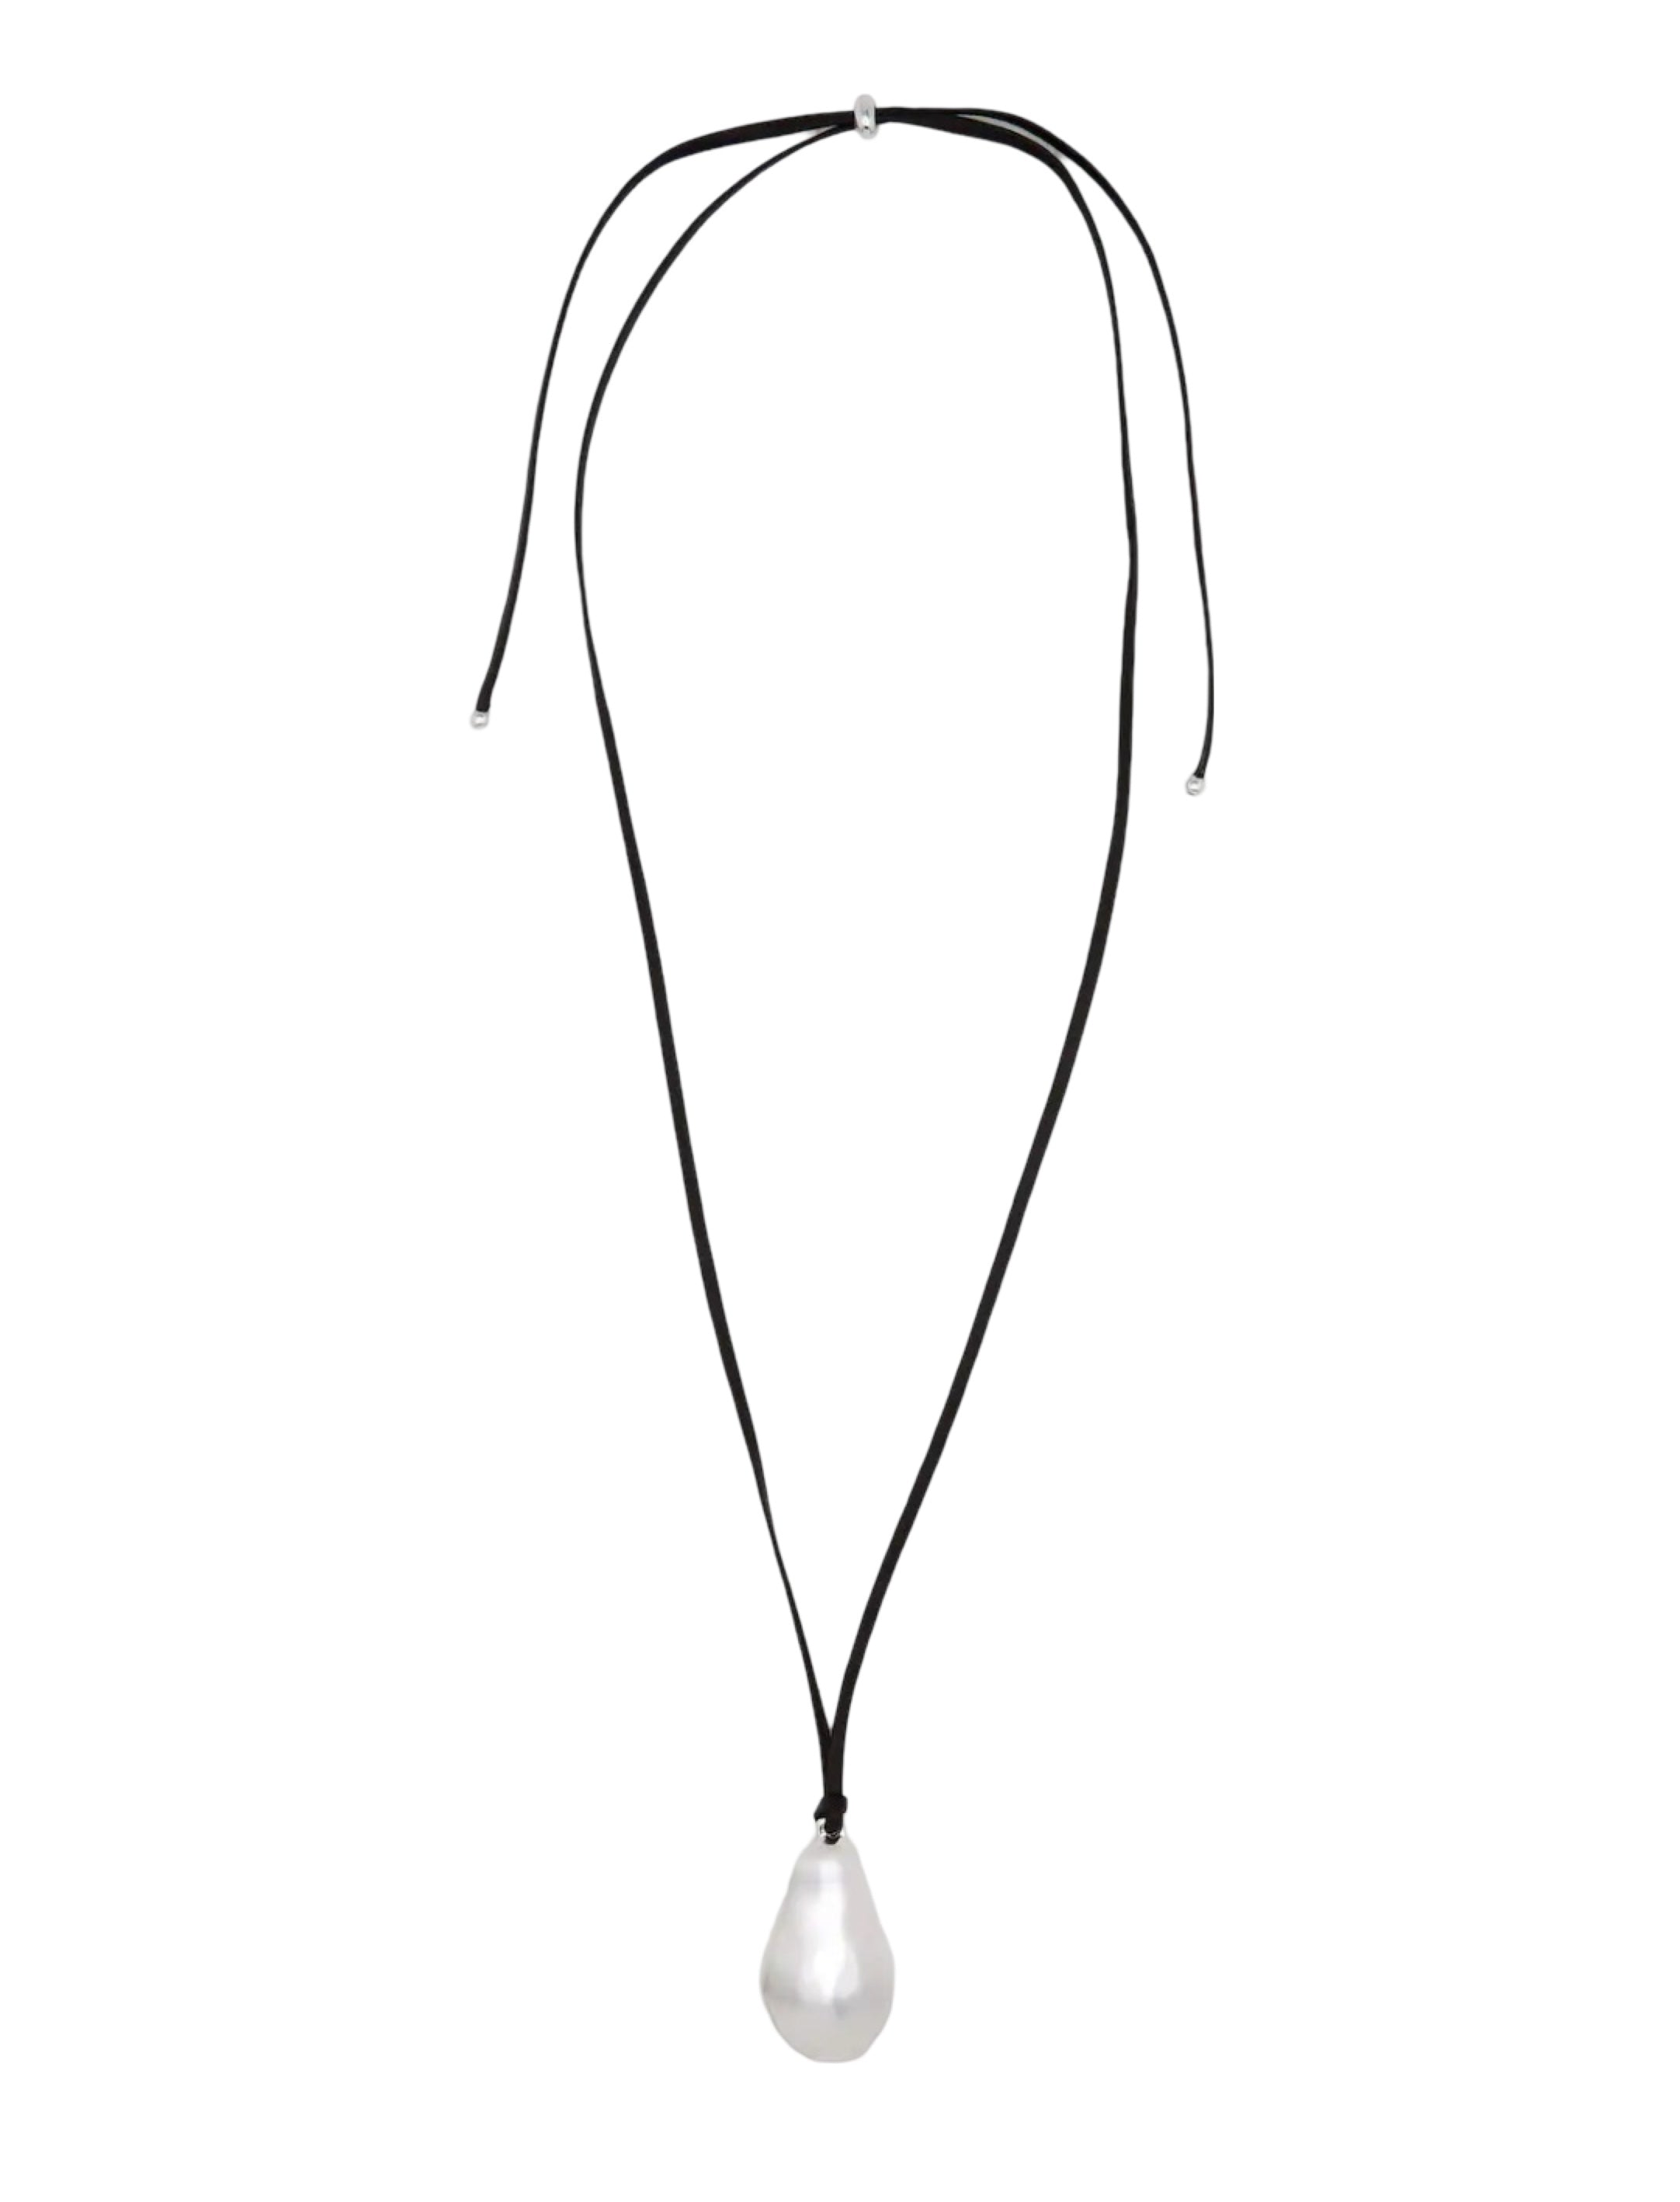 Leather Cord Necklace with Asymmetric Piece